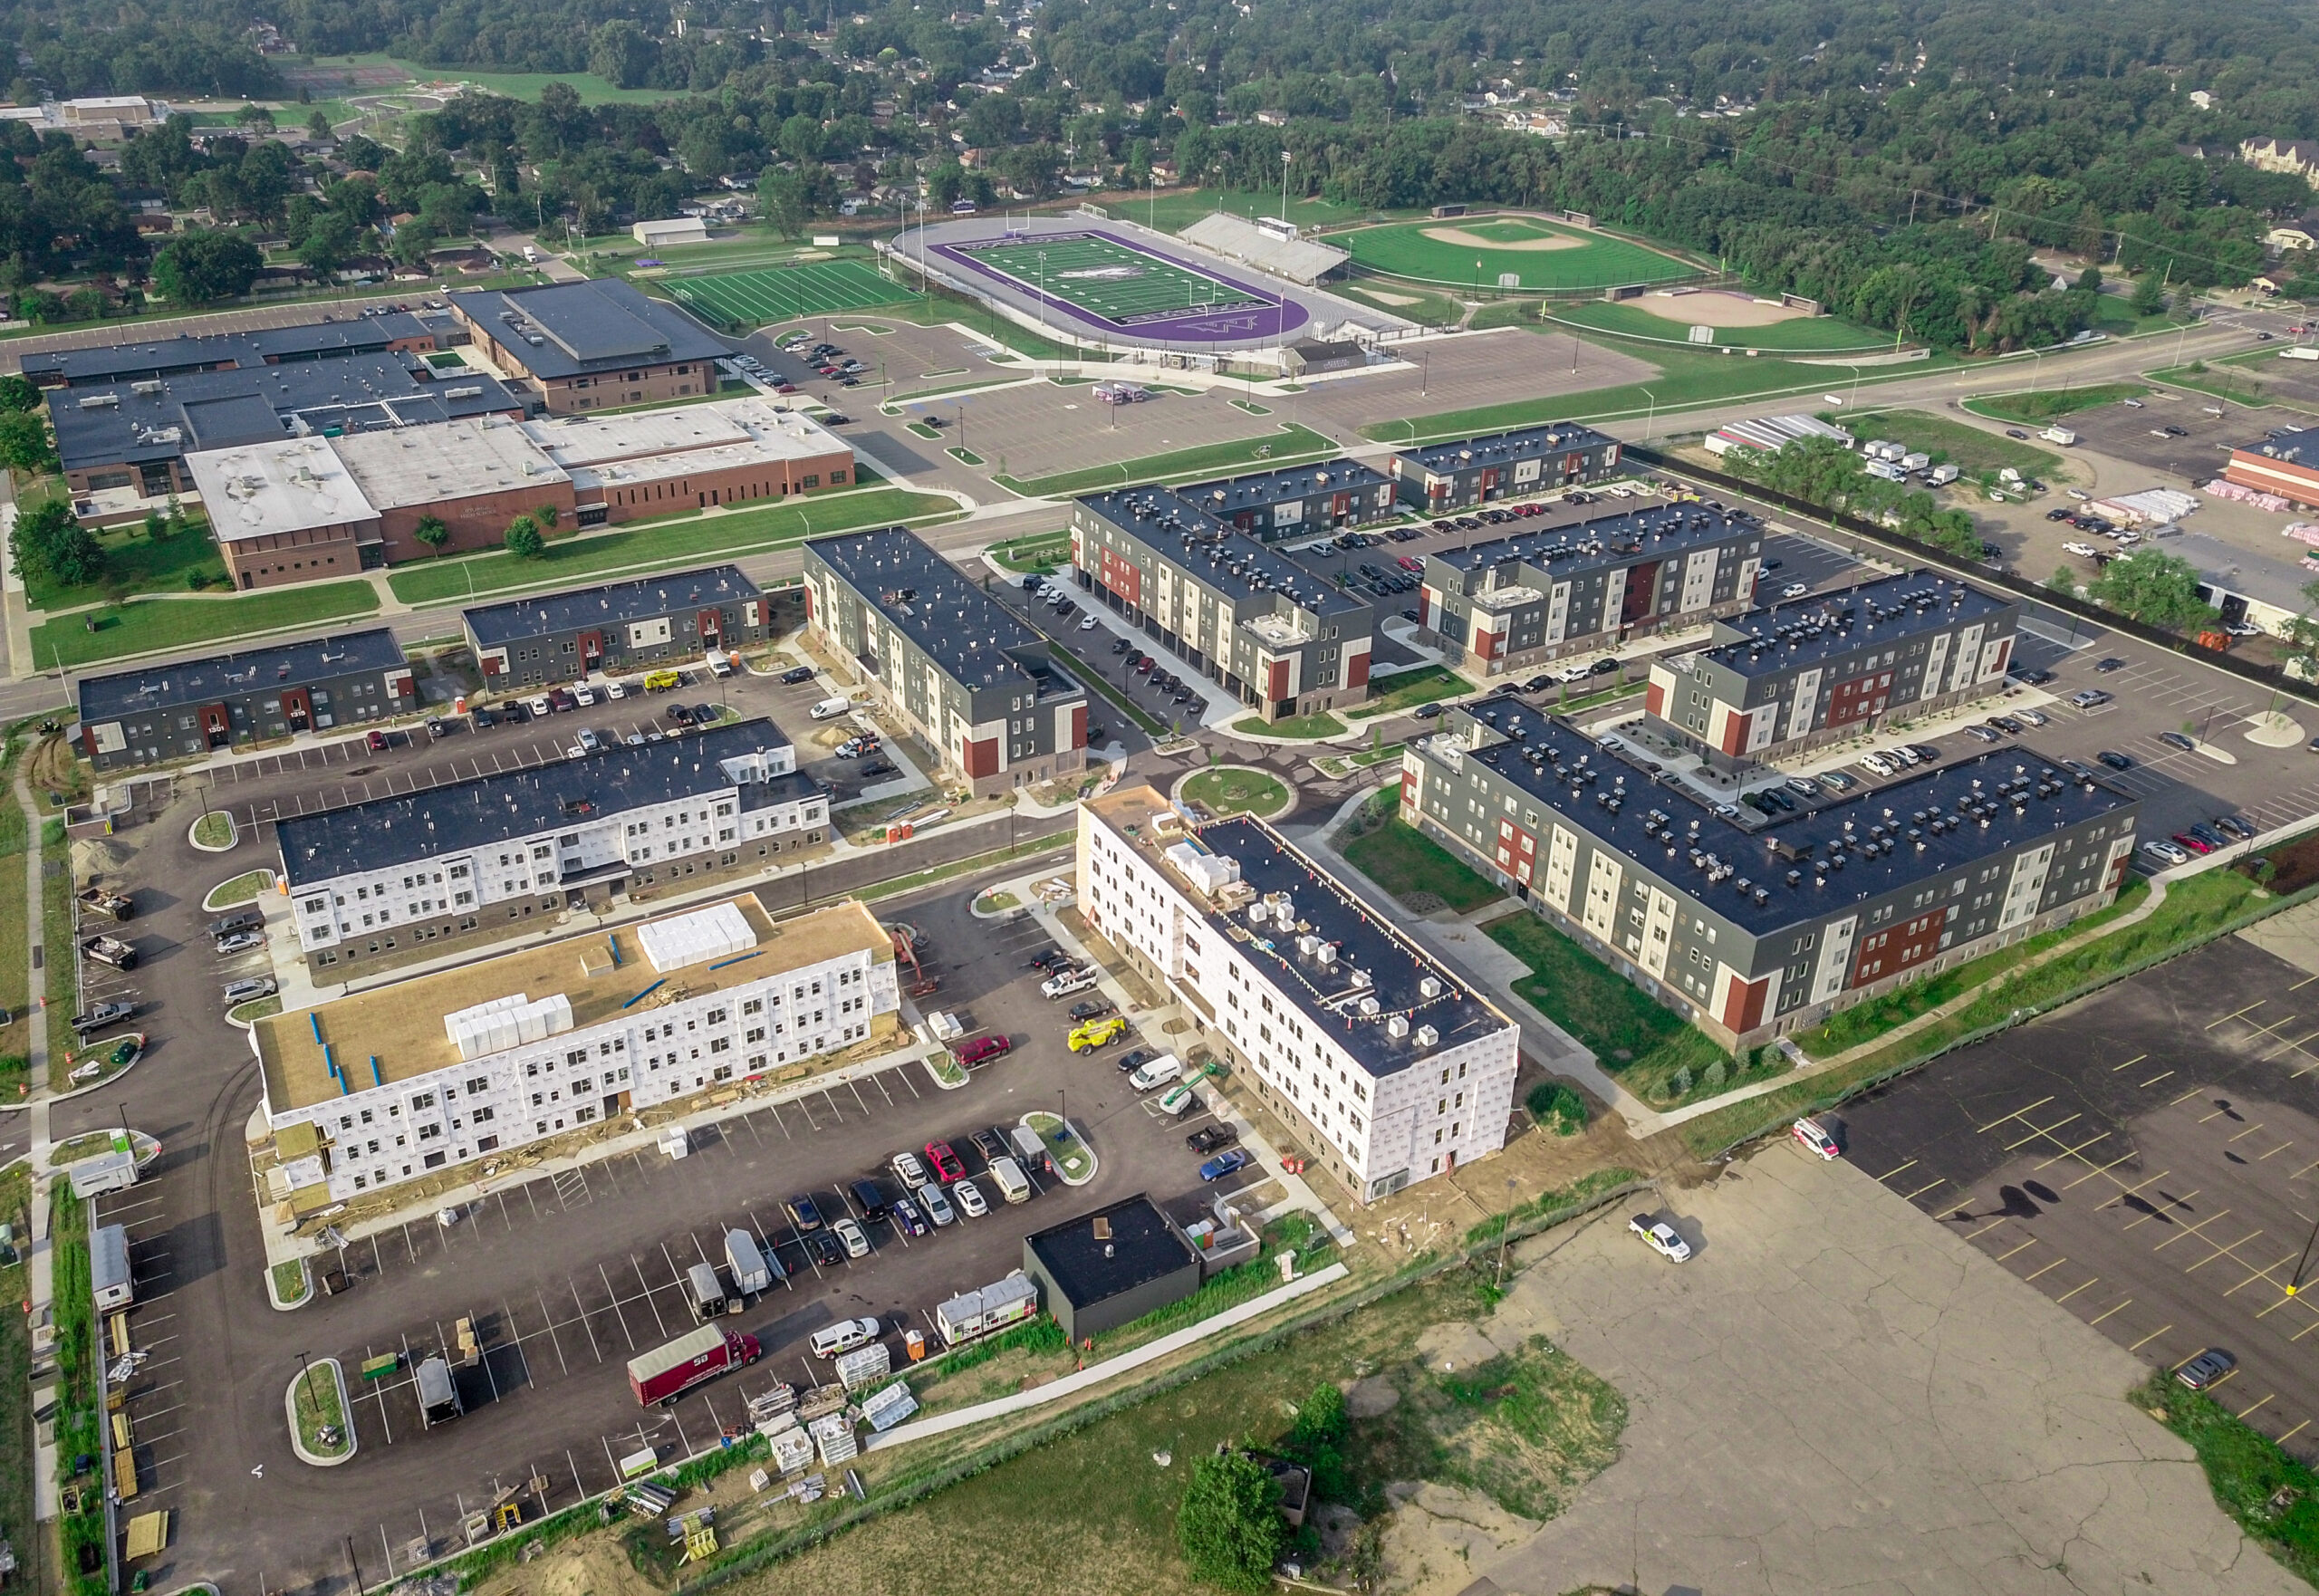 Aerial view of the compound with multiple apartment style buildings constructed